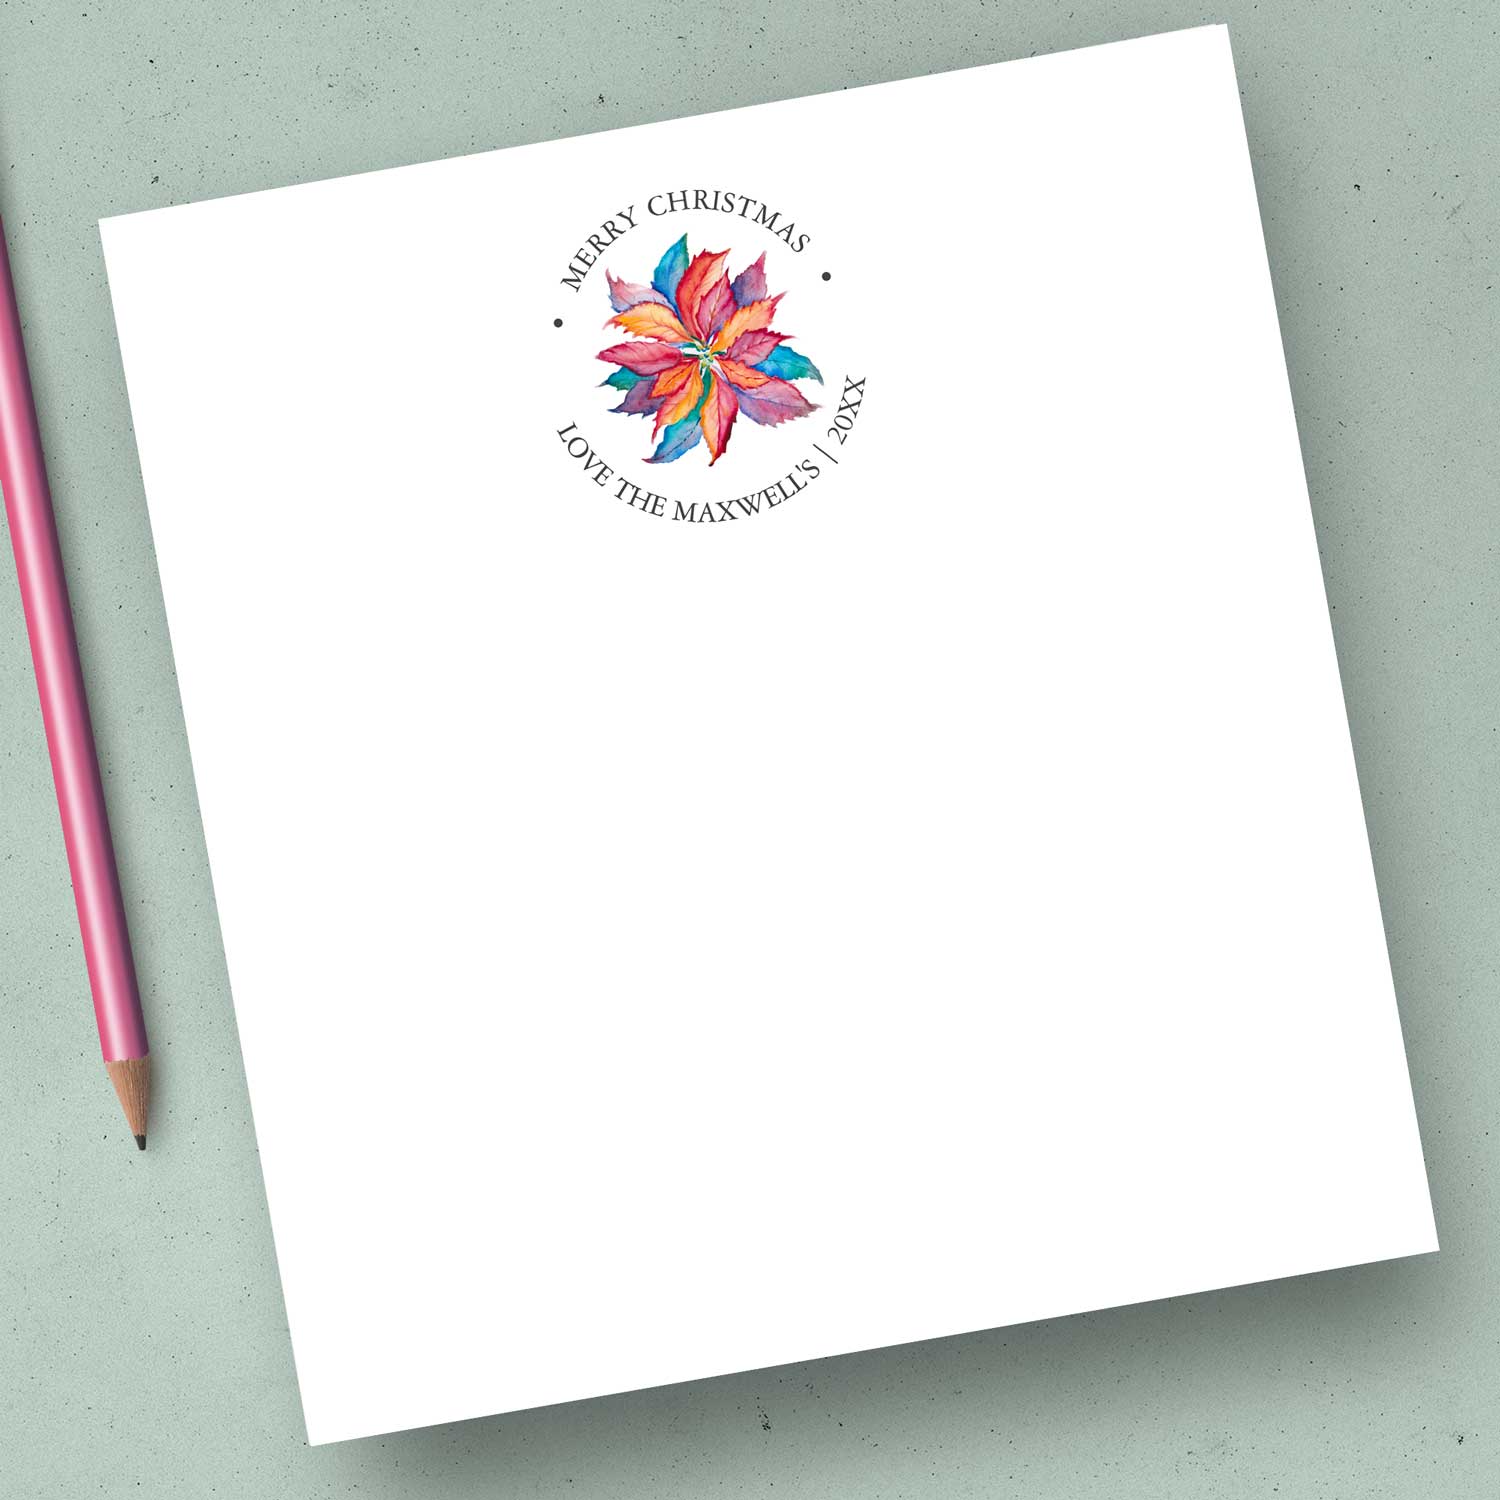 Bulk Christmas notepads feature a watercolor poinsettia encircled by your custom text. Click to shop